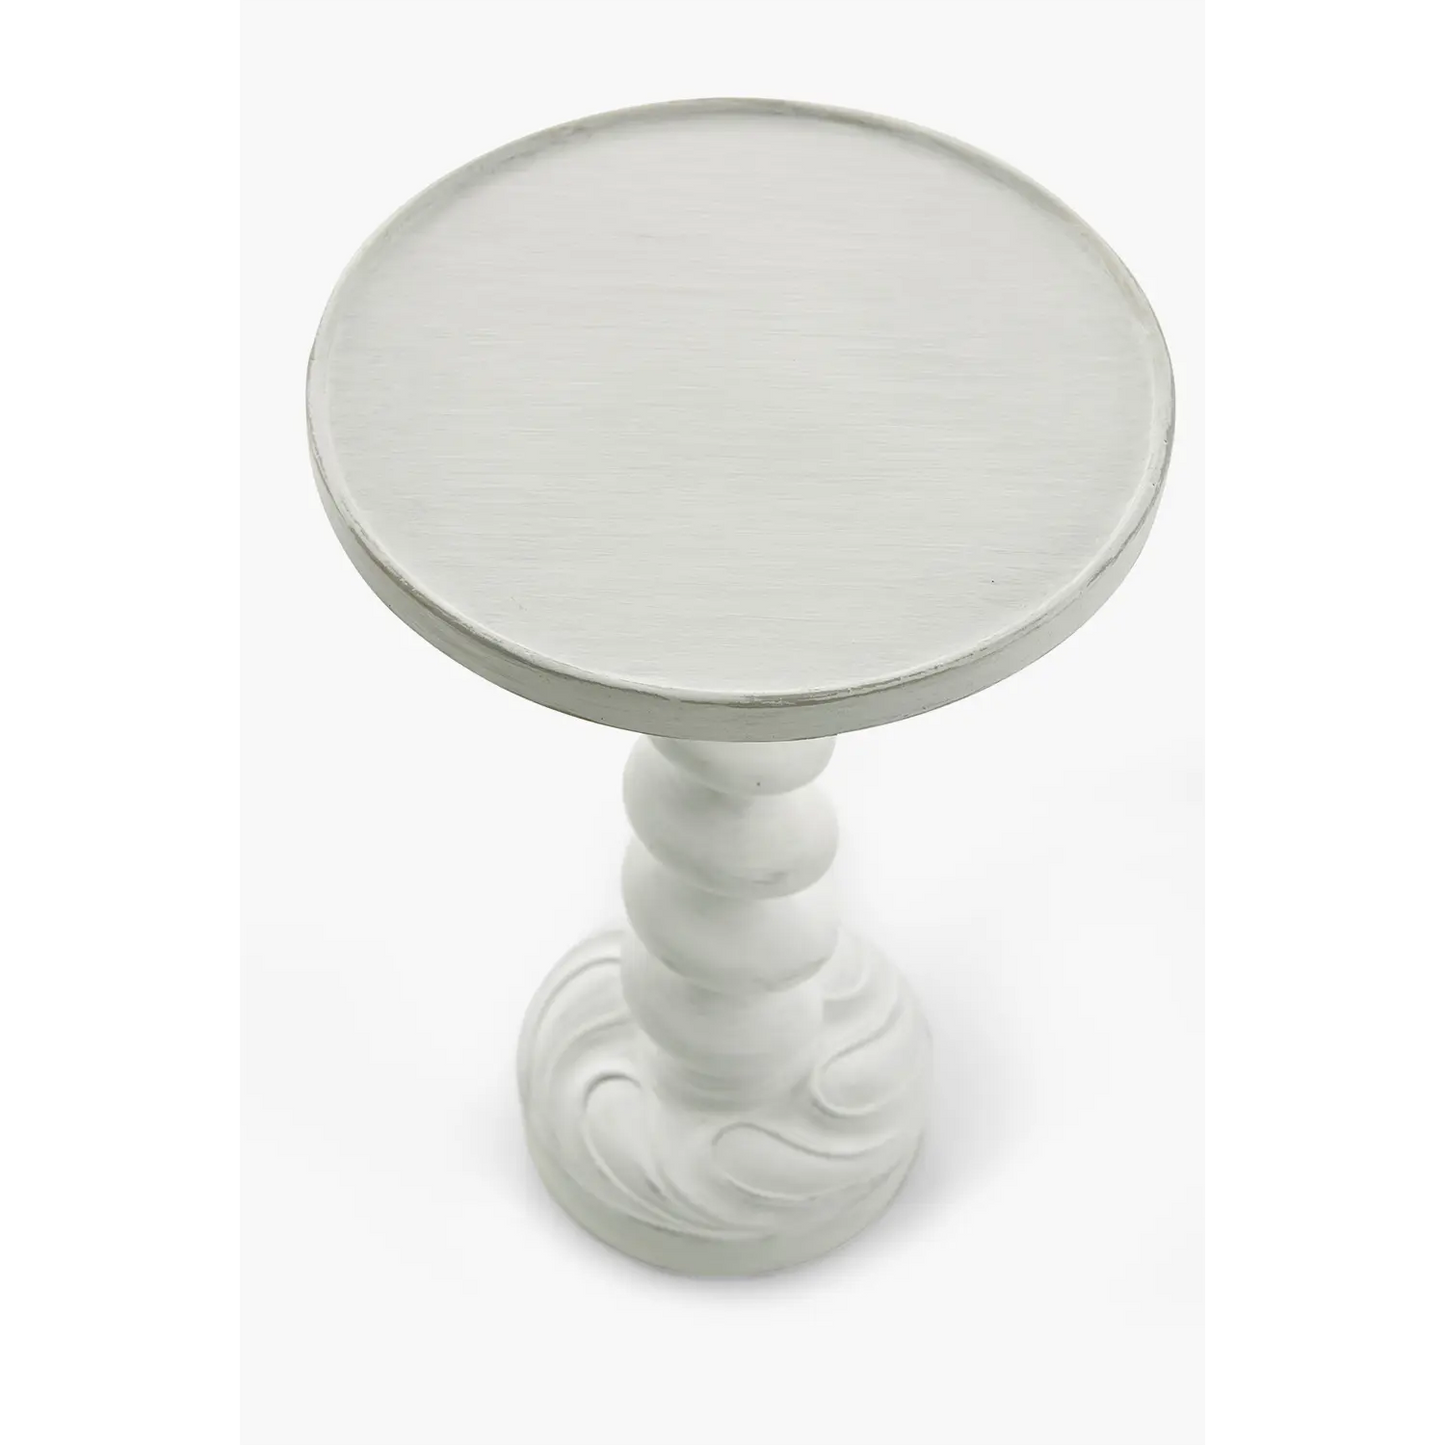 The Croix Accent Table